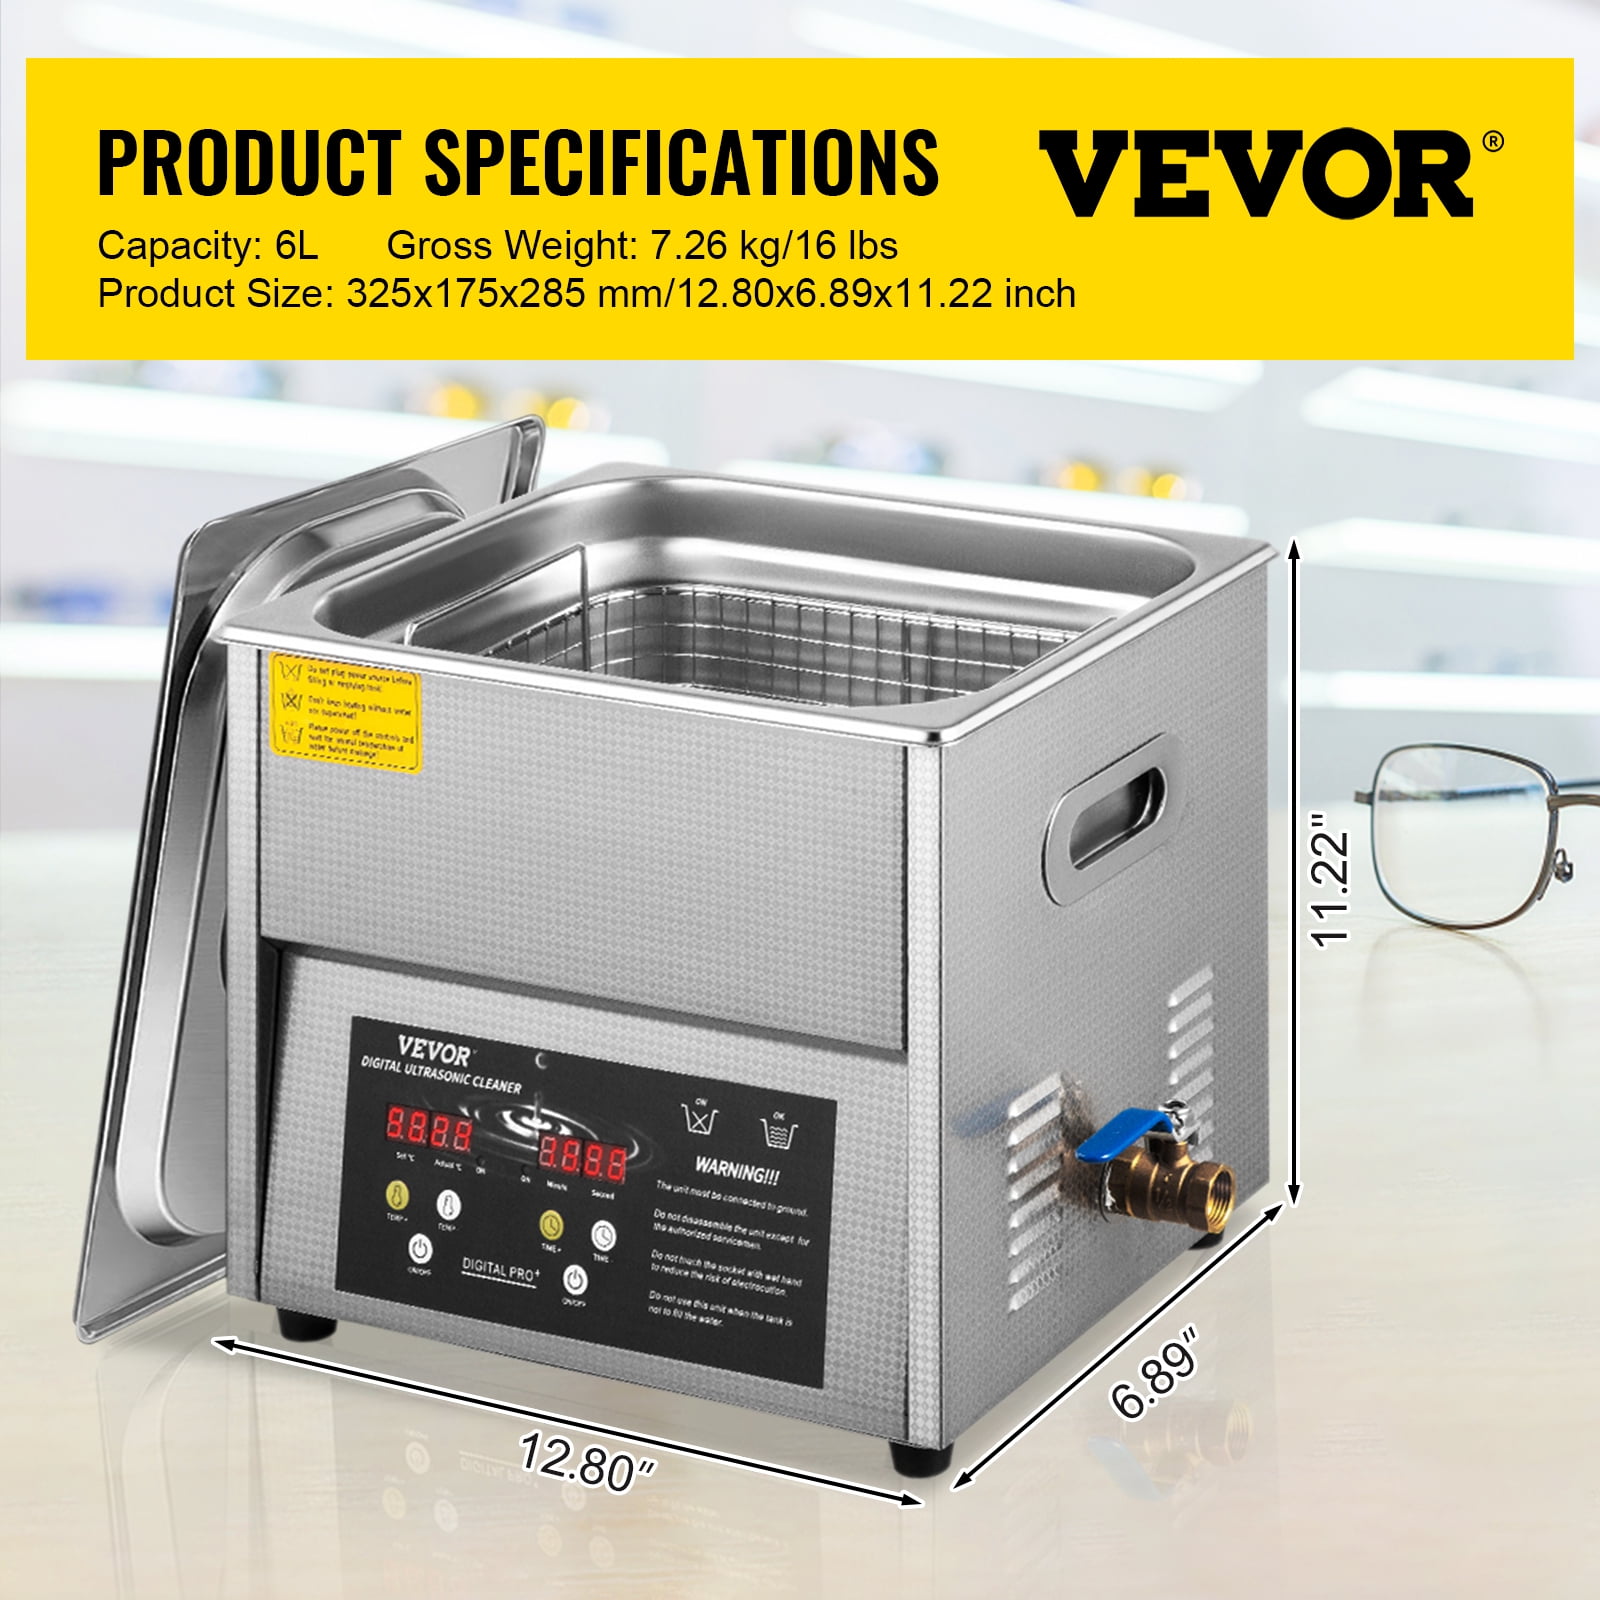  VEVOR Digital Ultrasonic Cleaner 6L Ultrasonic Cleaning Machine  50kHz 110V Sonic Cleaner Machine 304 Stainless Steel Ultrasonic Cleaner  Machine with Heater & Timer for Cleaning Jewelry Glasses Watches :  Industrial 